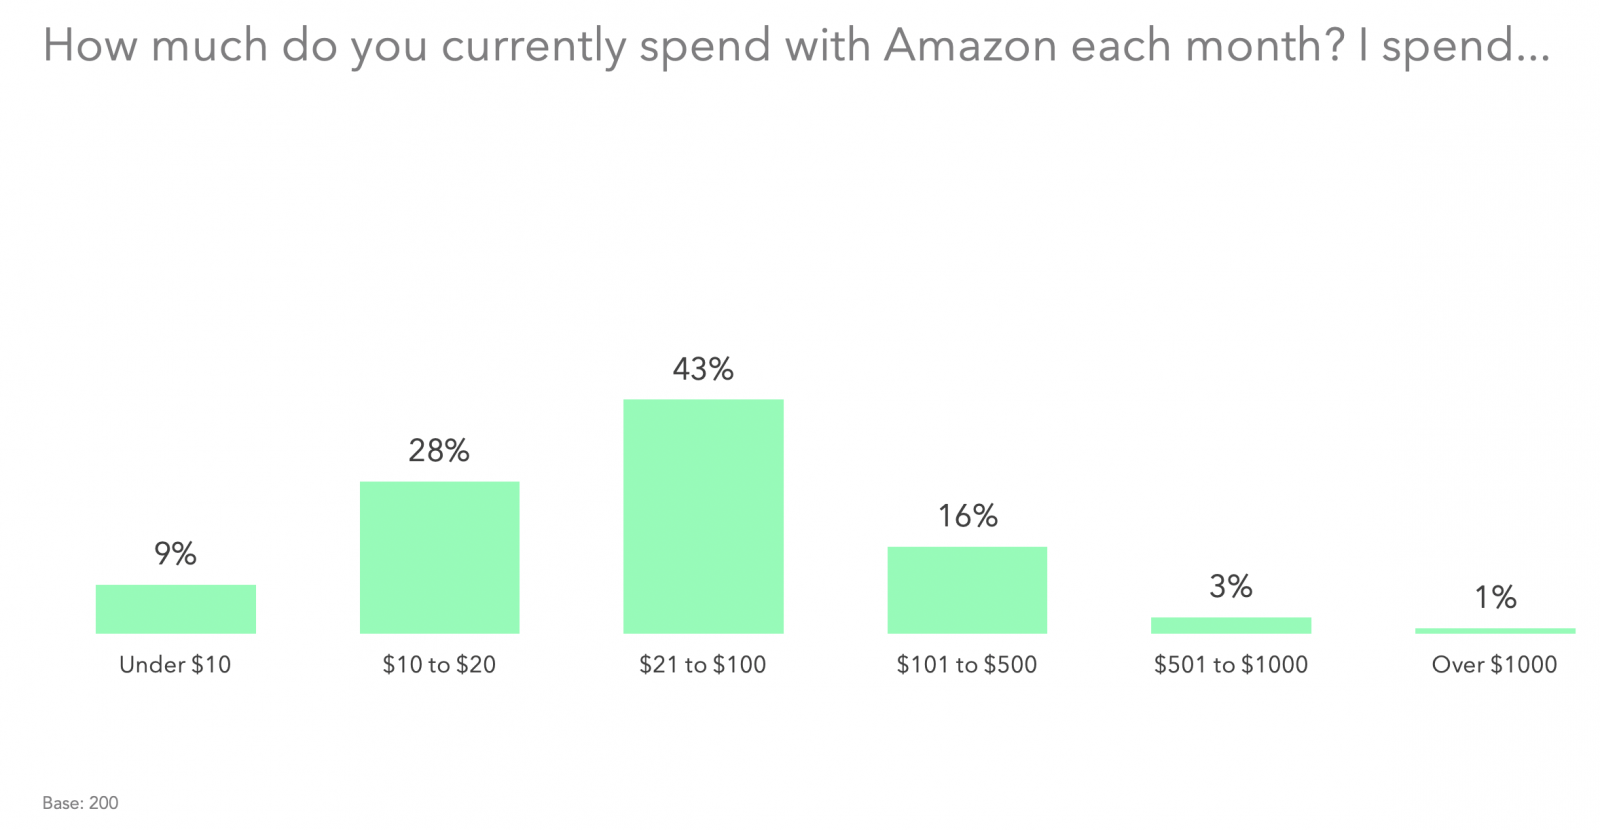 How much do you currently spend with Amazon each month?